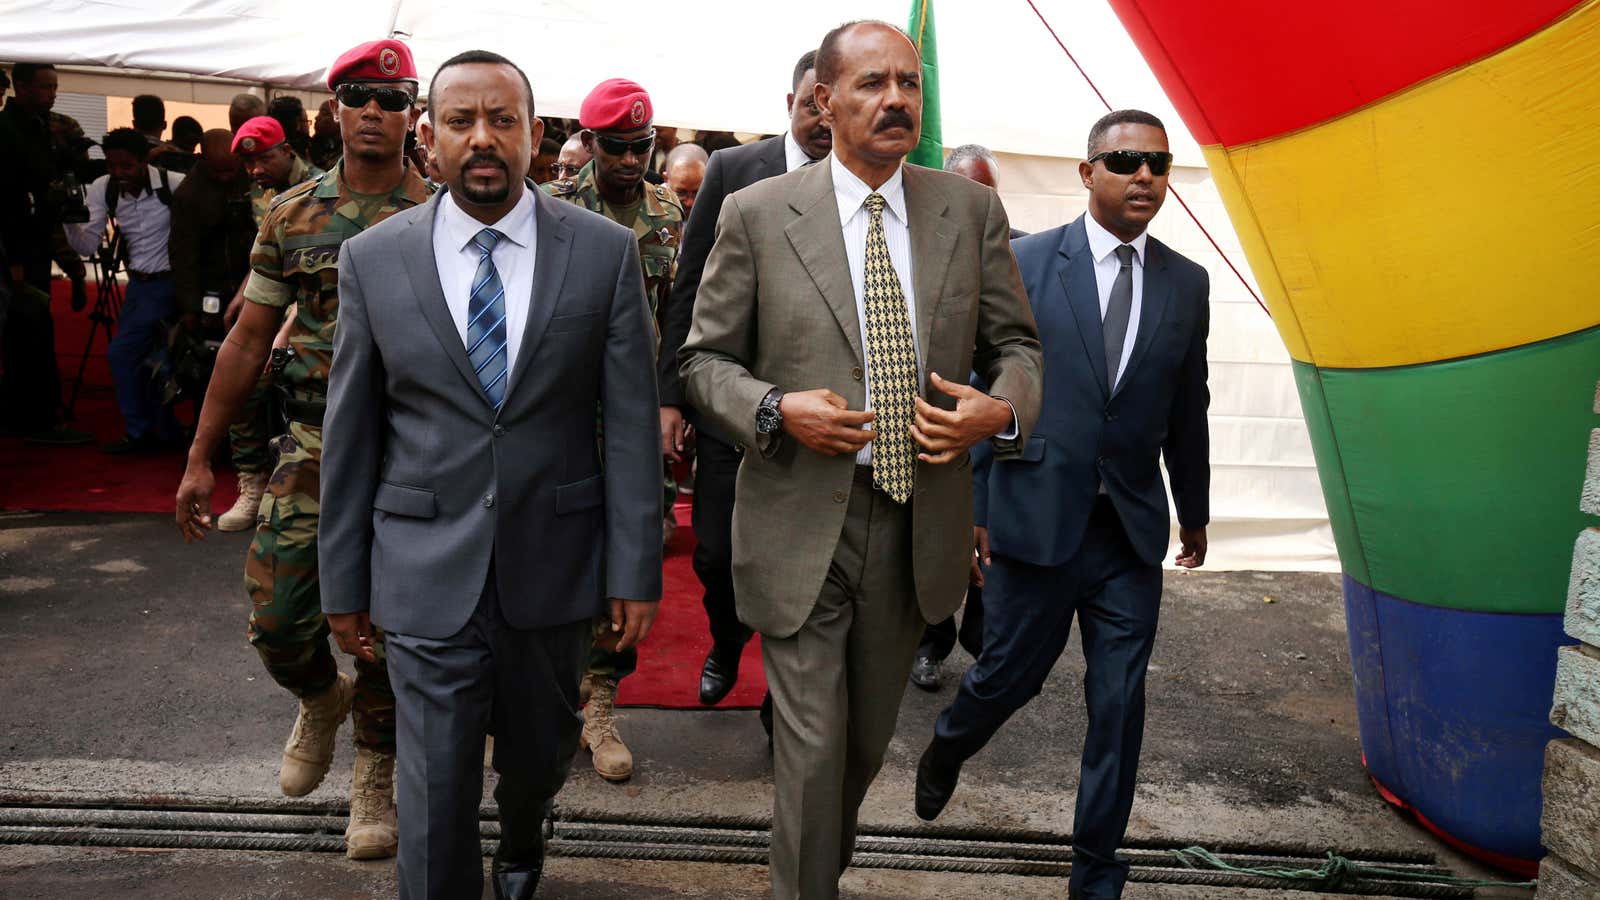 Eritrea’s President Isaias Afwerki R) and Ethiopia’s Prime Minister, Abiy Ahmed arrive for the reopening of the Eritrean embassy in Addis Ababa, Ethiopia July 16, 2018.